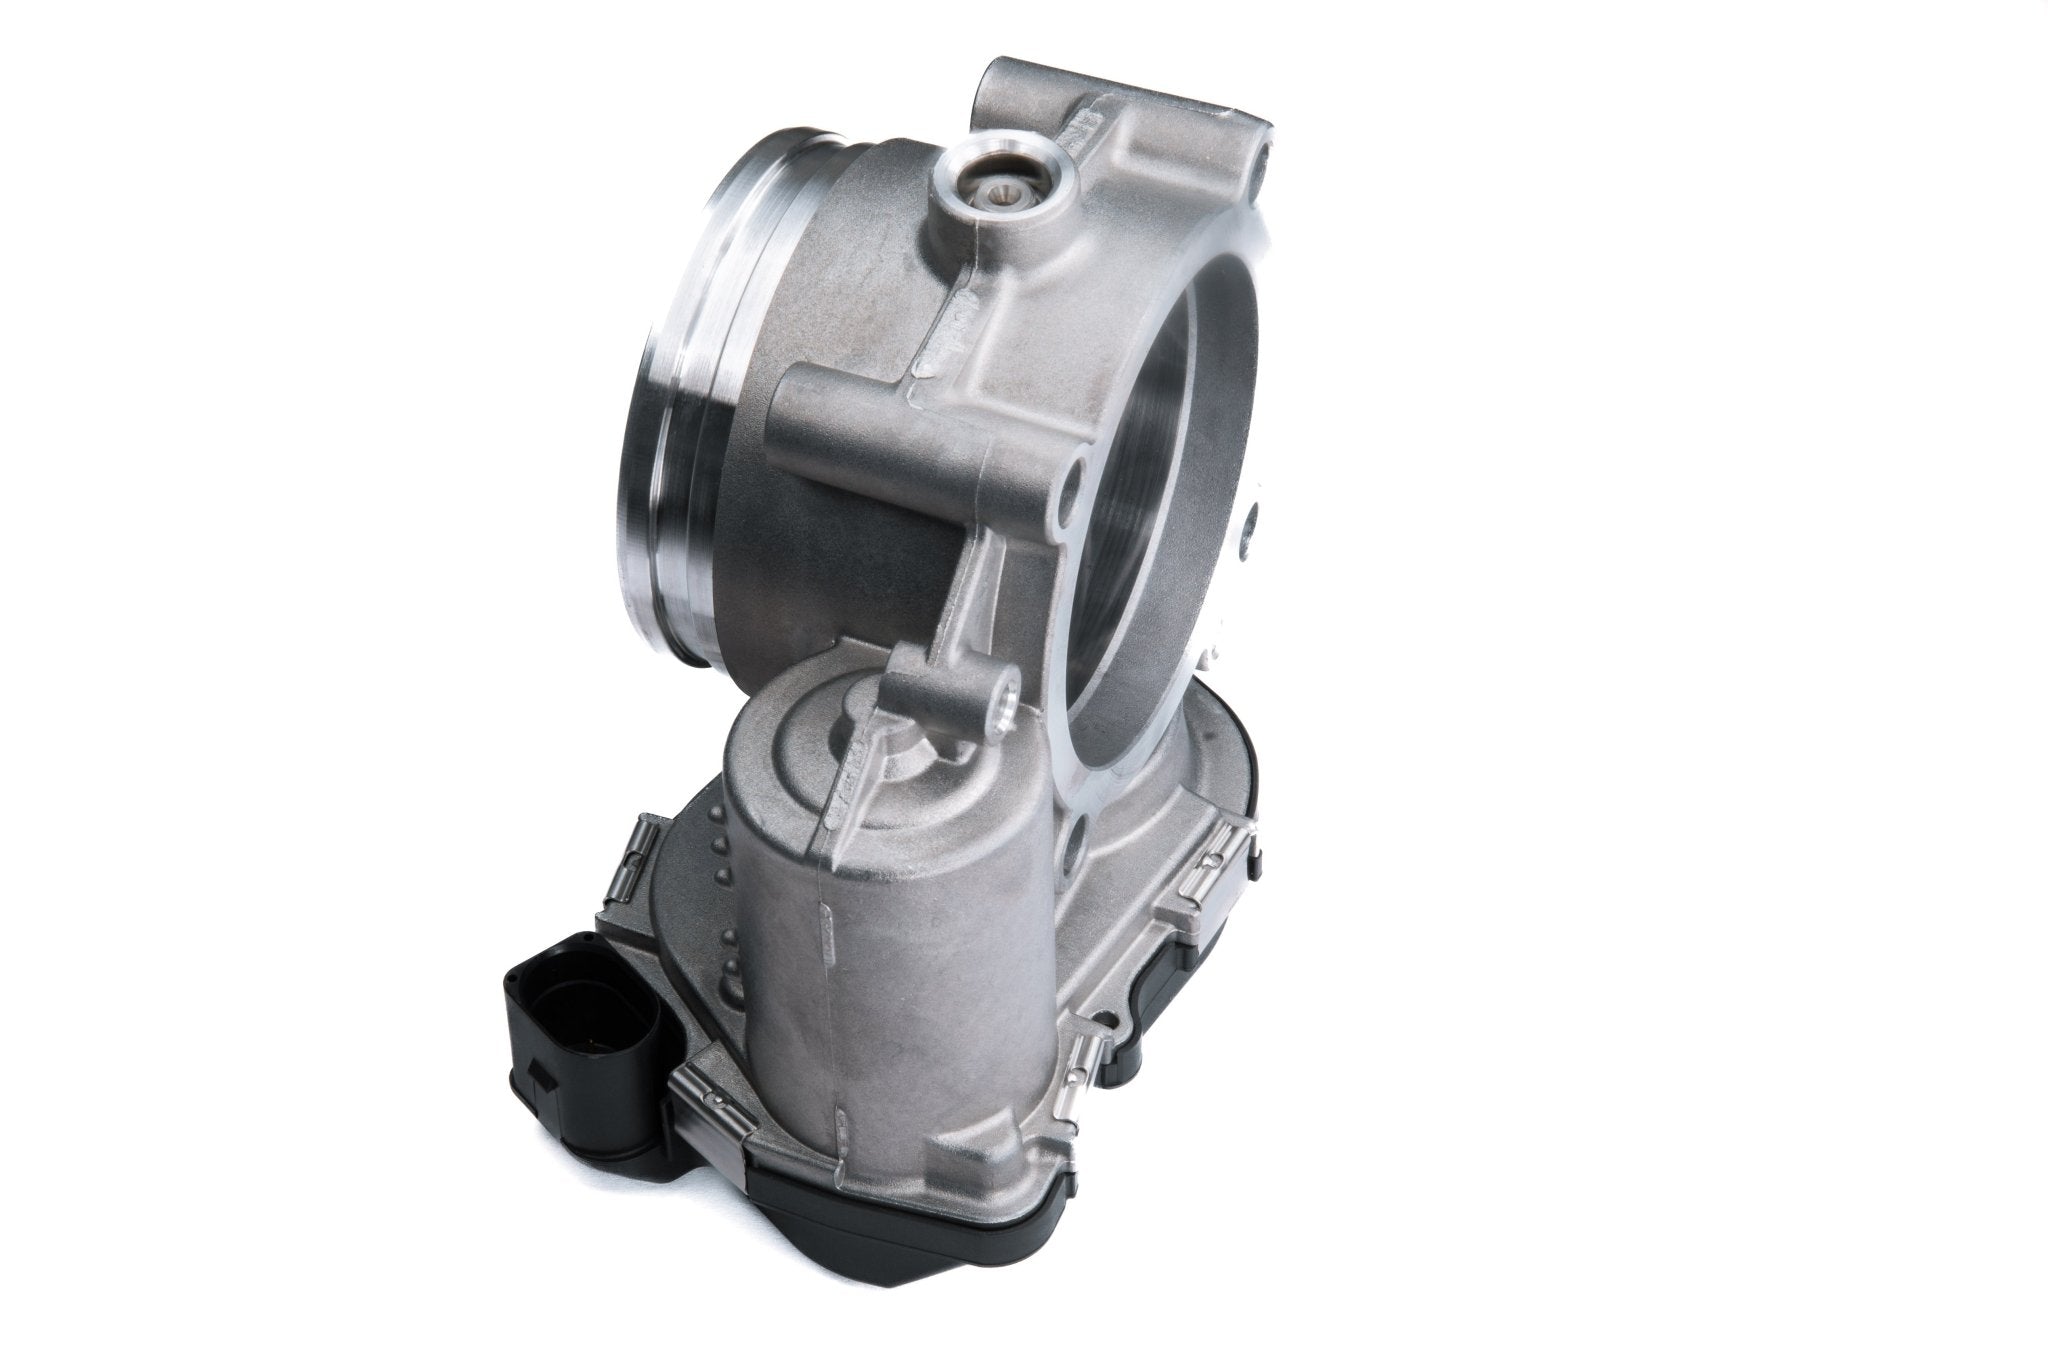 70mm Upgraded Throttle Body for VW AG Engines - RTMG Performance